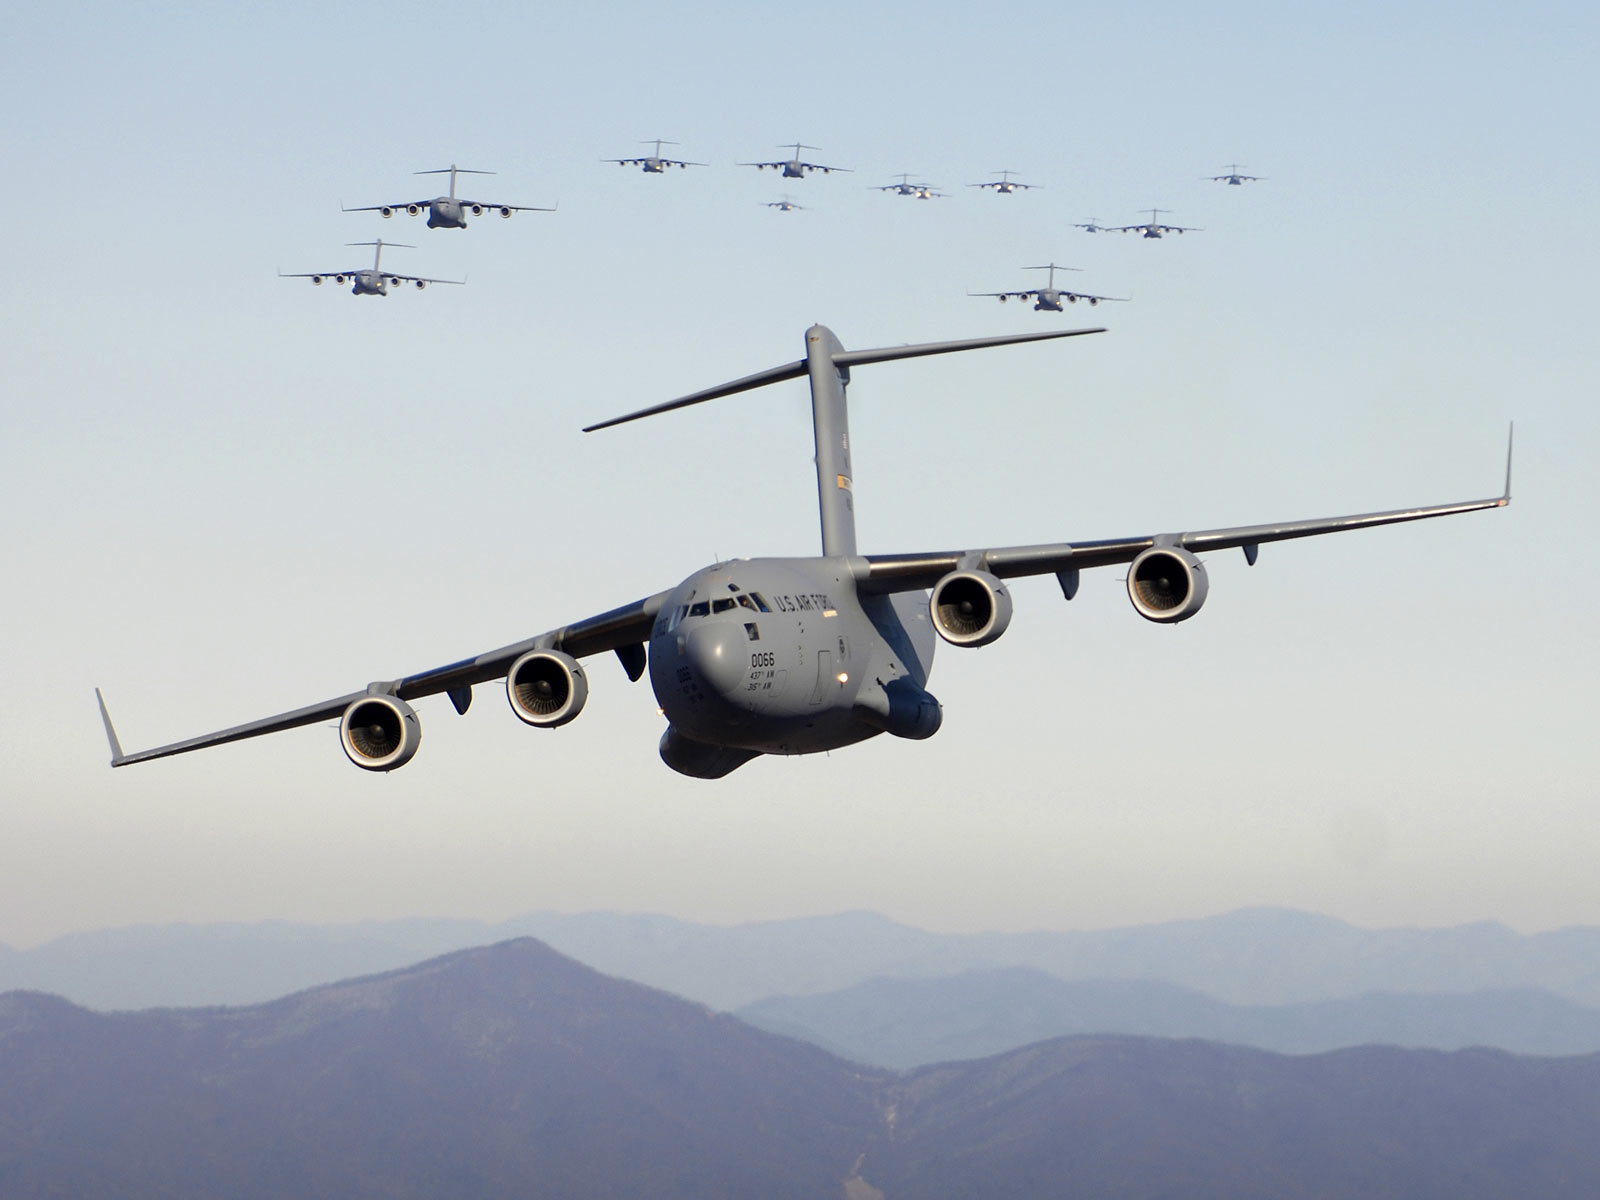 Globemaster Iii HD Wallpaper And Make This For Your